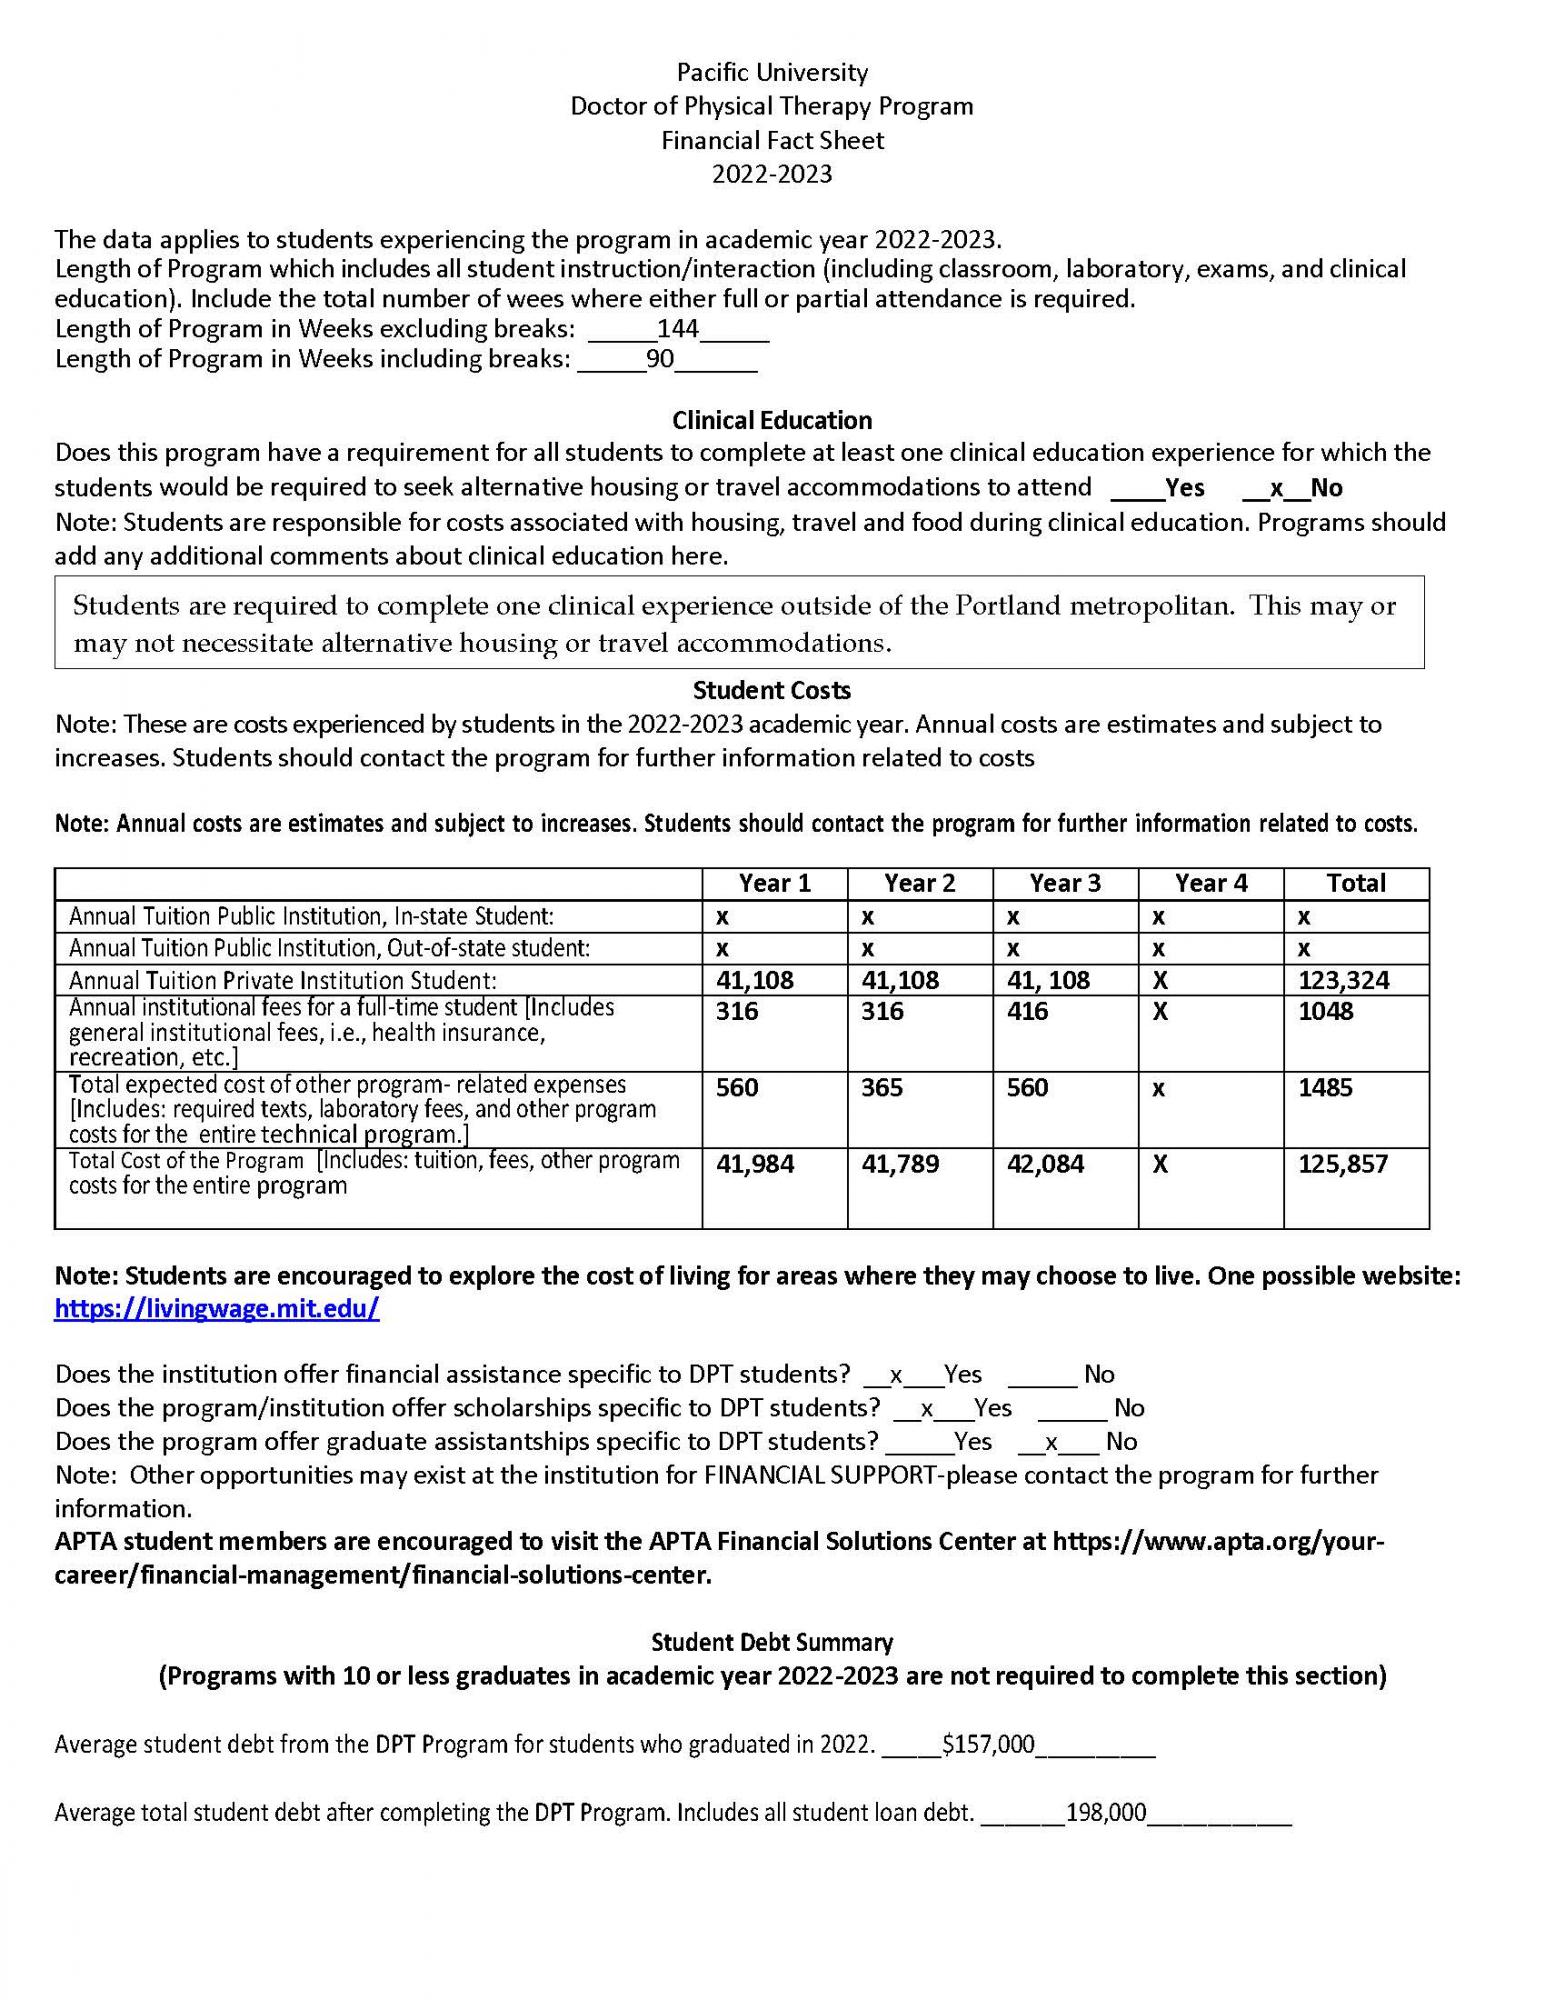 screenshot of financial fact sheet with tuition information. Linked above.